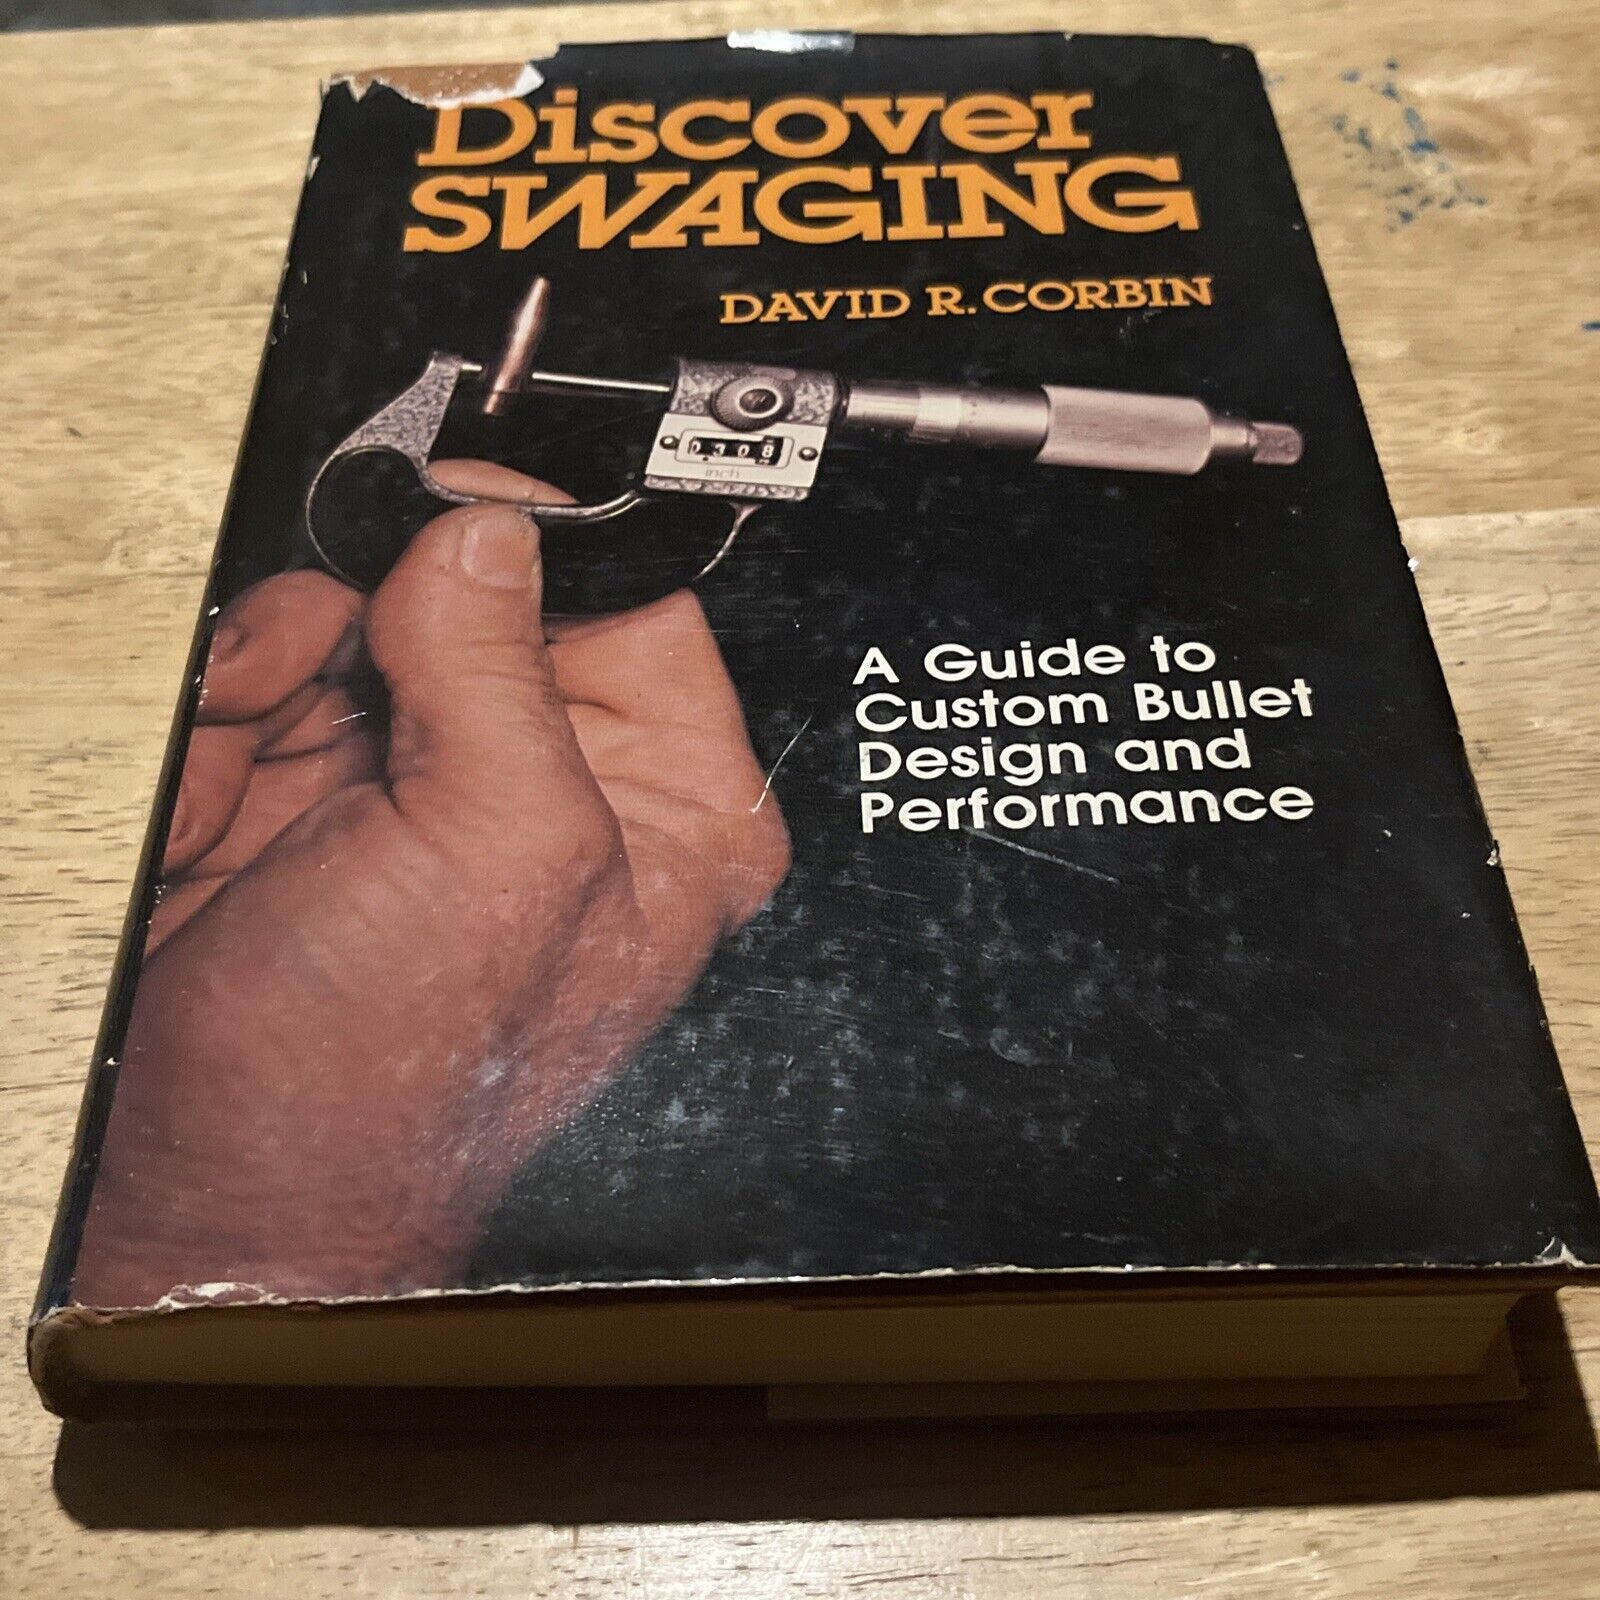 Discover Swaging by David R Corbin A Guide to Custom Bullet Design & Performance